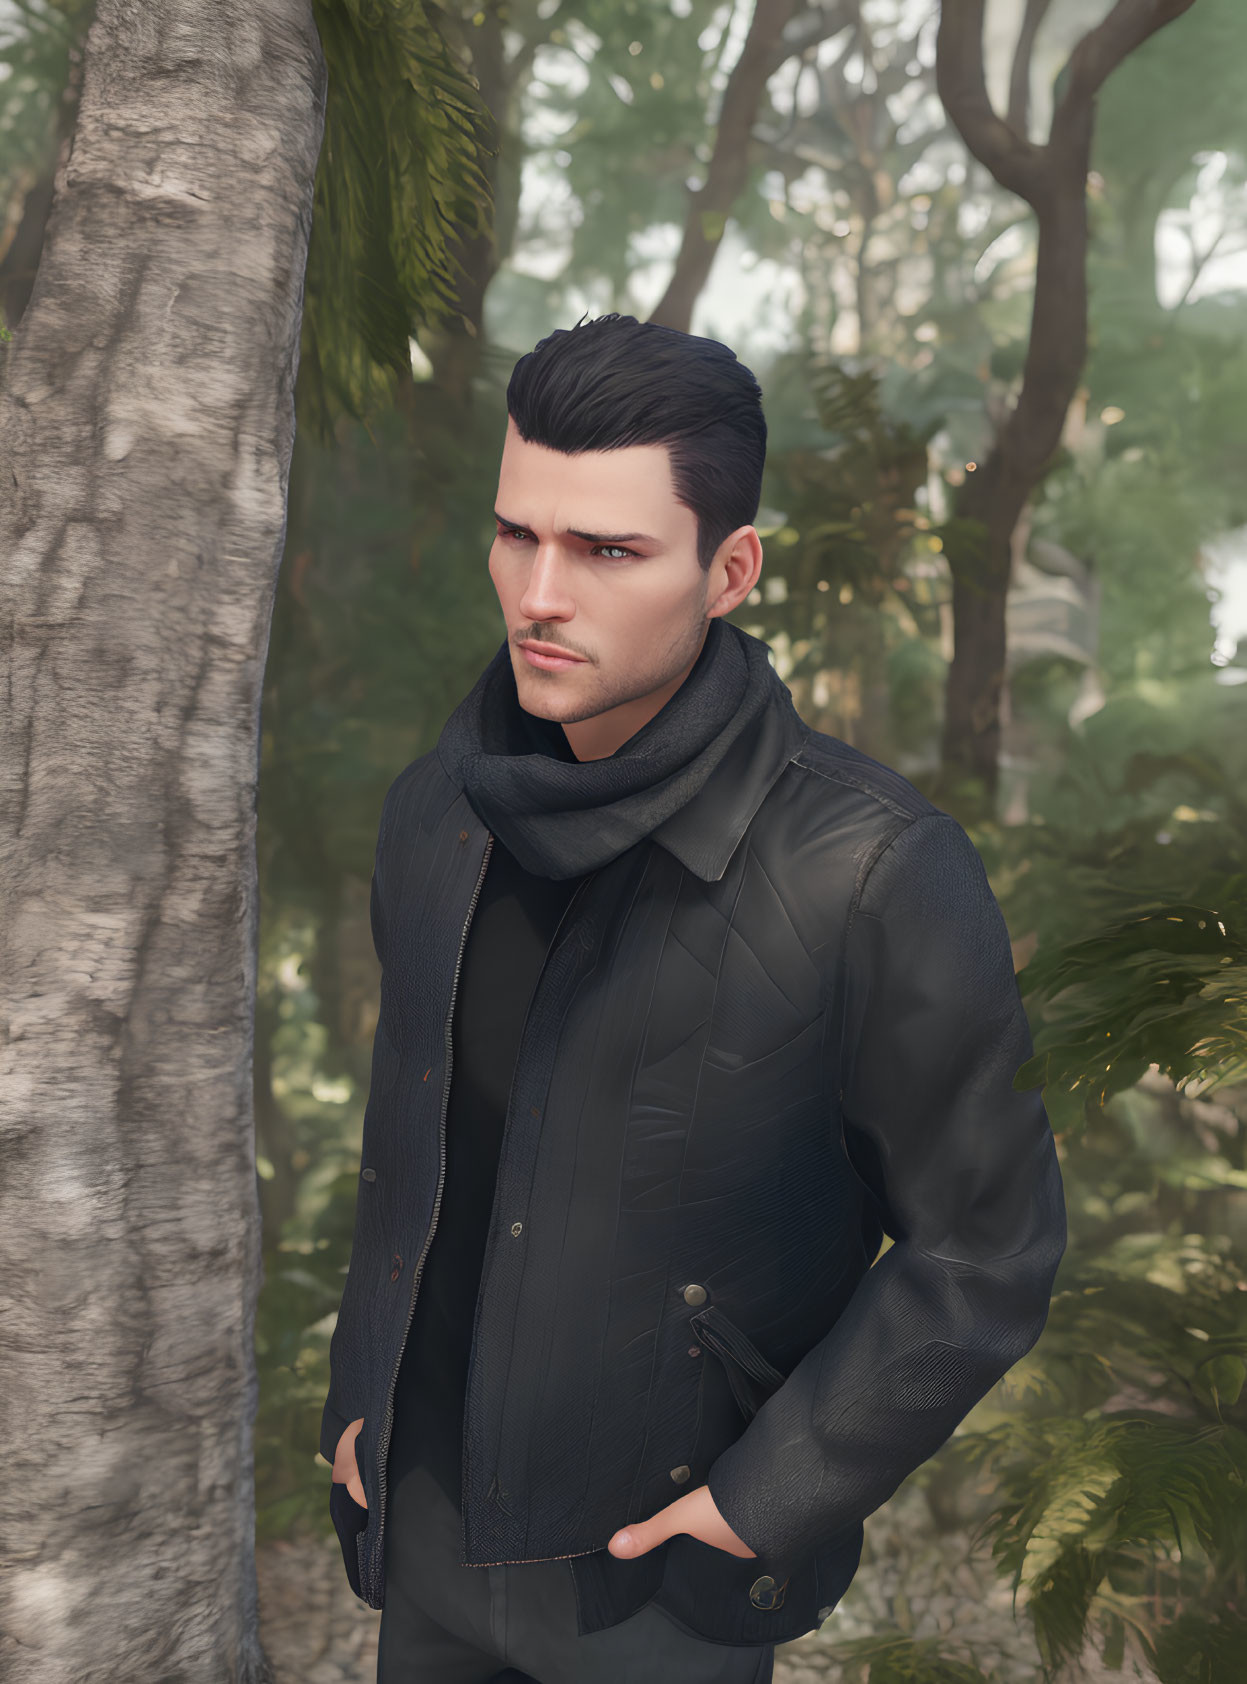 Dark-haired man in leather jacket and scarf in misty forest